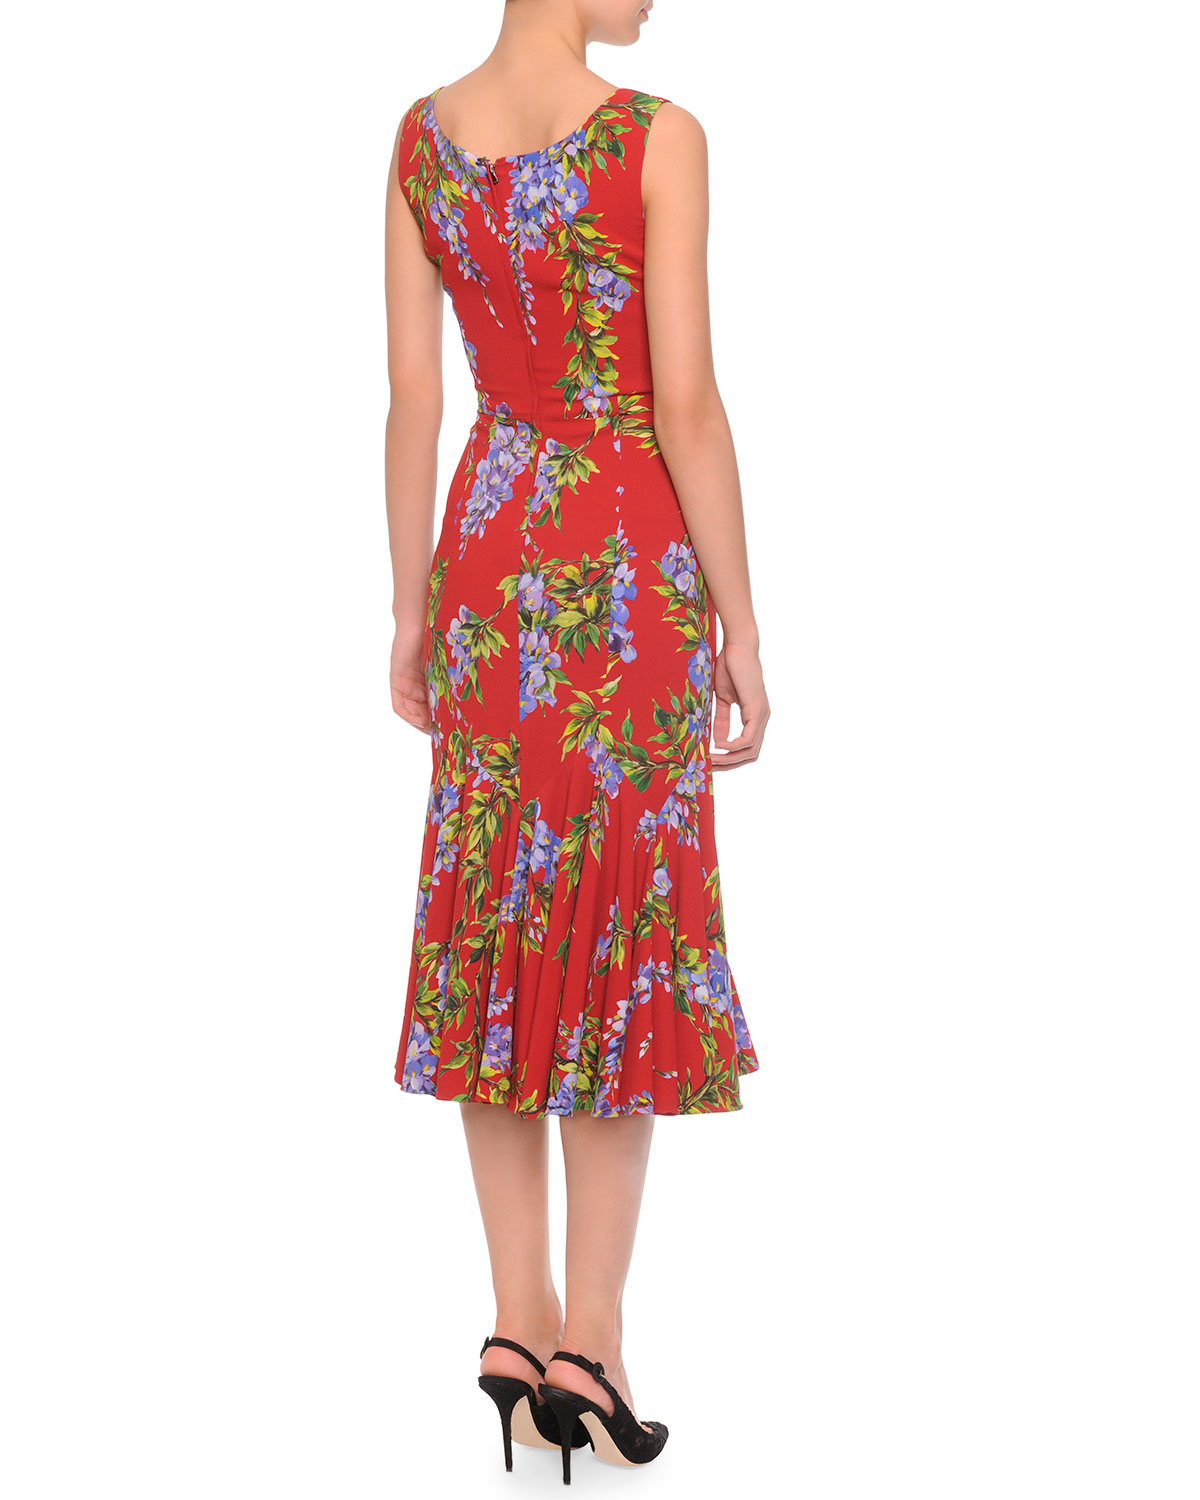 Dolce & gabbana Floral-Print Scoop Dress in Red (floral) | Lyst